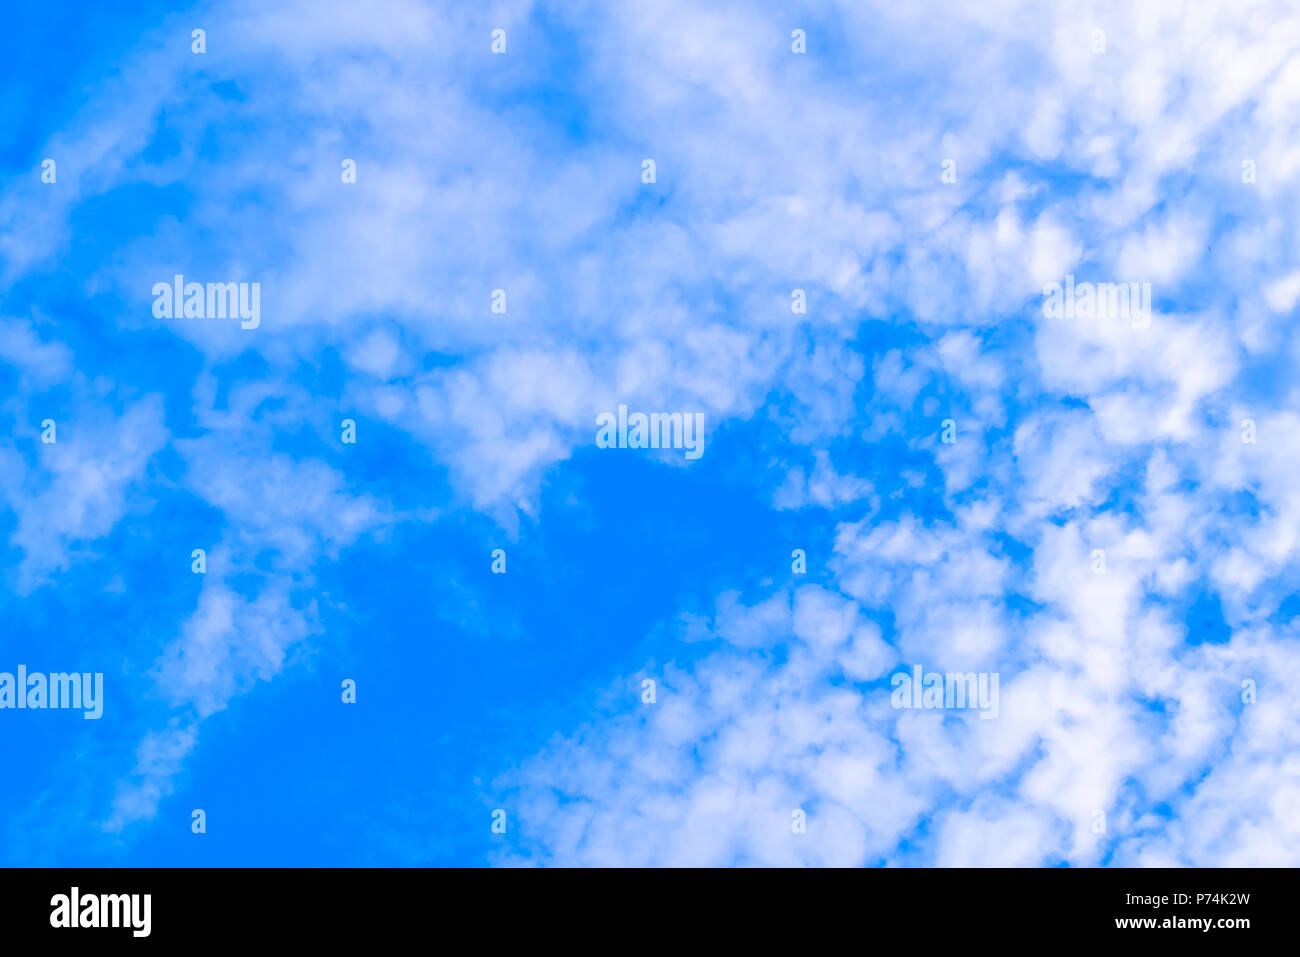 Beautiful Clouds With Blue Sky Background Nature Weather Cloud Blue Sky White Fluffy Clouds In The Blue Sky Copy Space For Editing Stock Photo Alamy